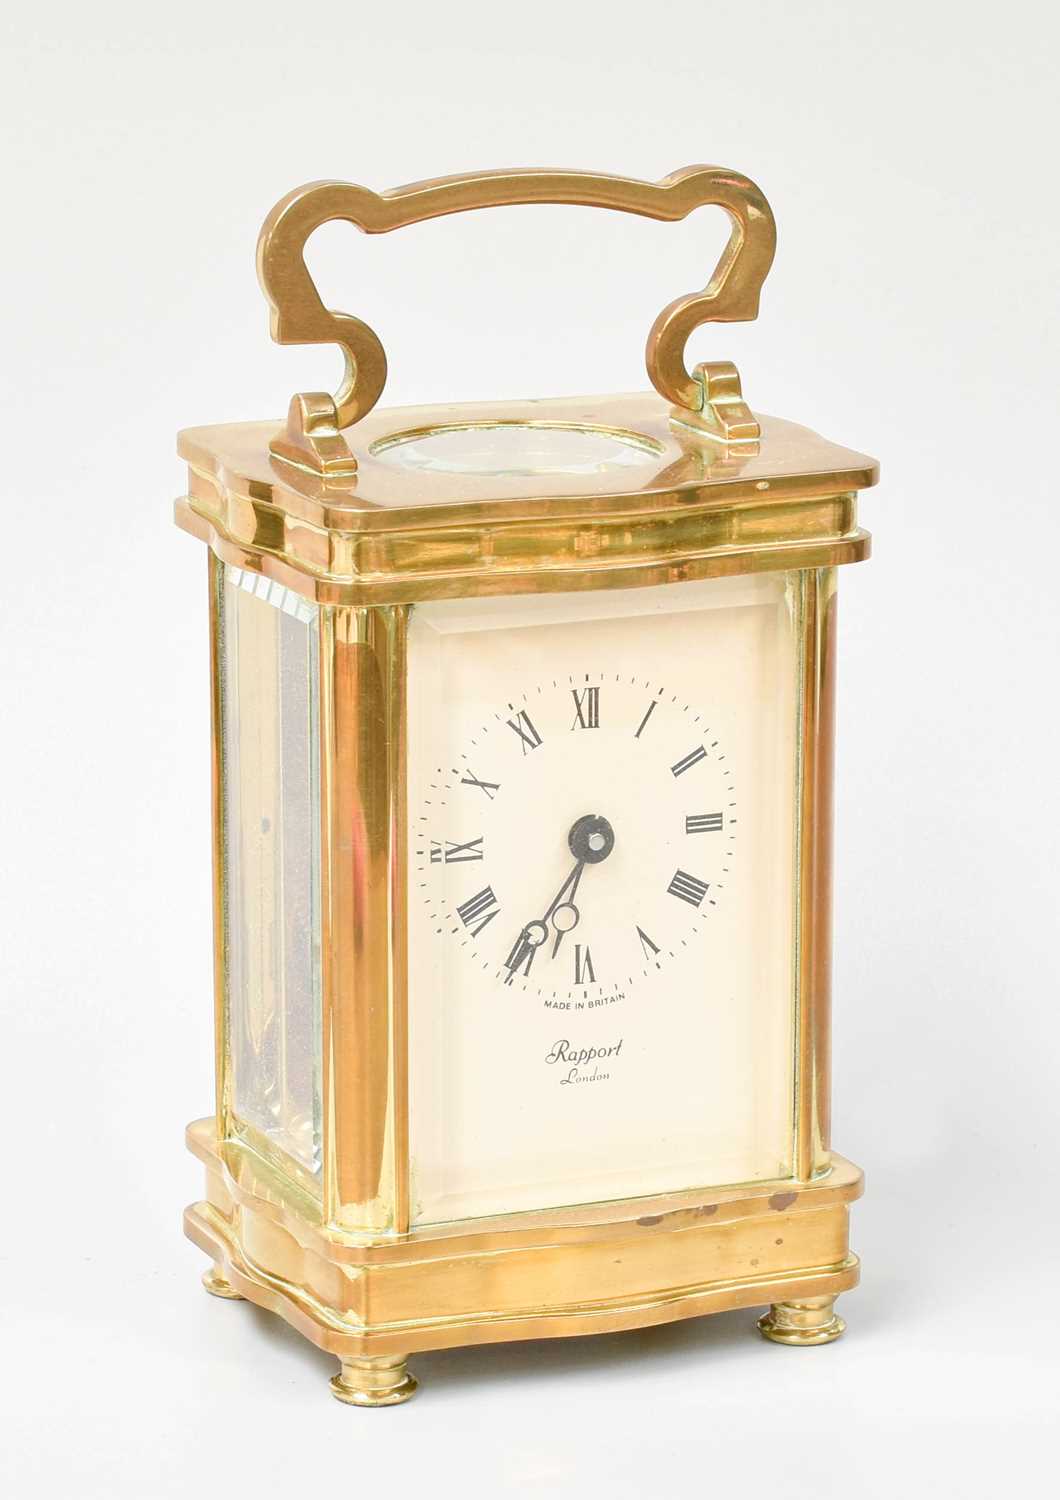 Lot 266 - A Rapport Brass Carriage Timepiece, with key